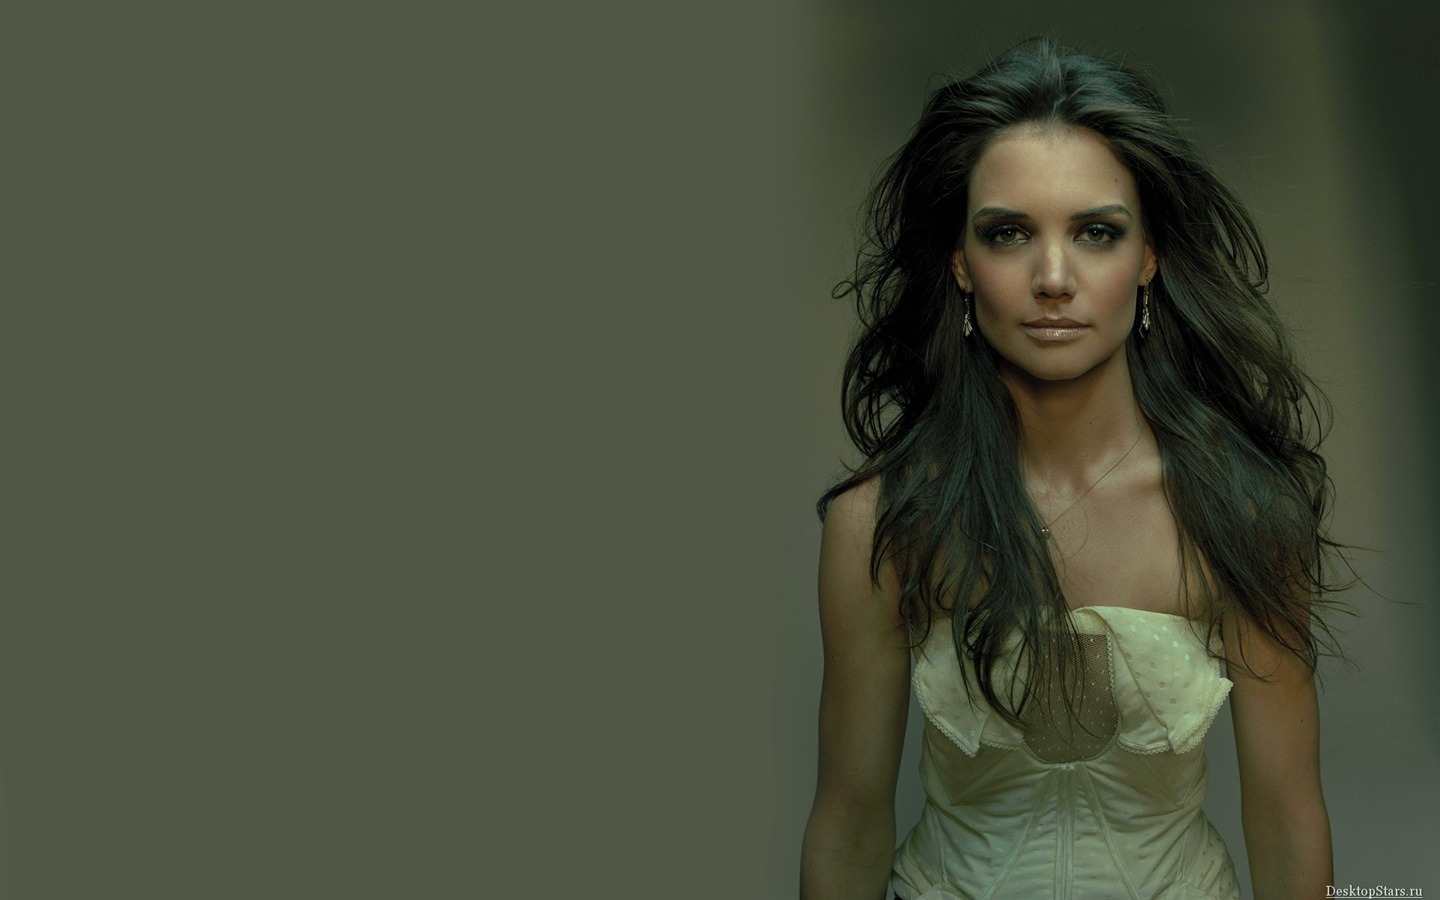 Katie Holmes #022 - 1440x900 Wallpapers Pictures Photos Images